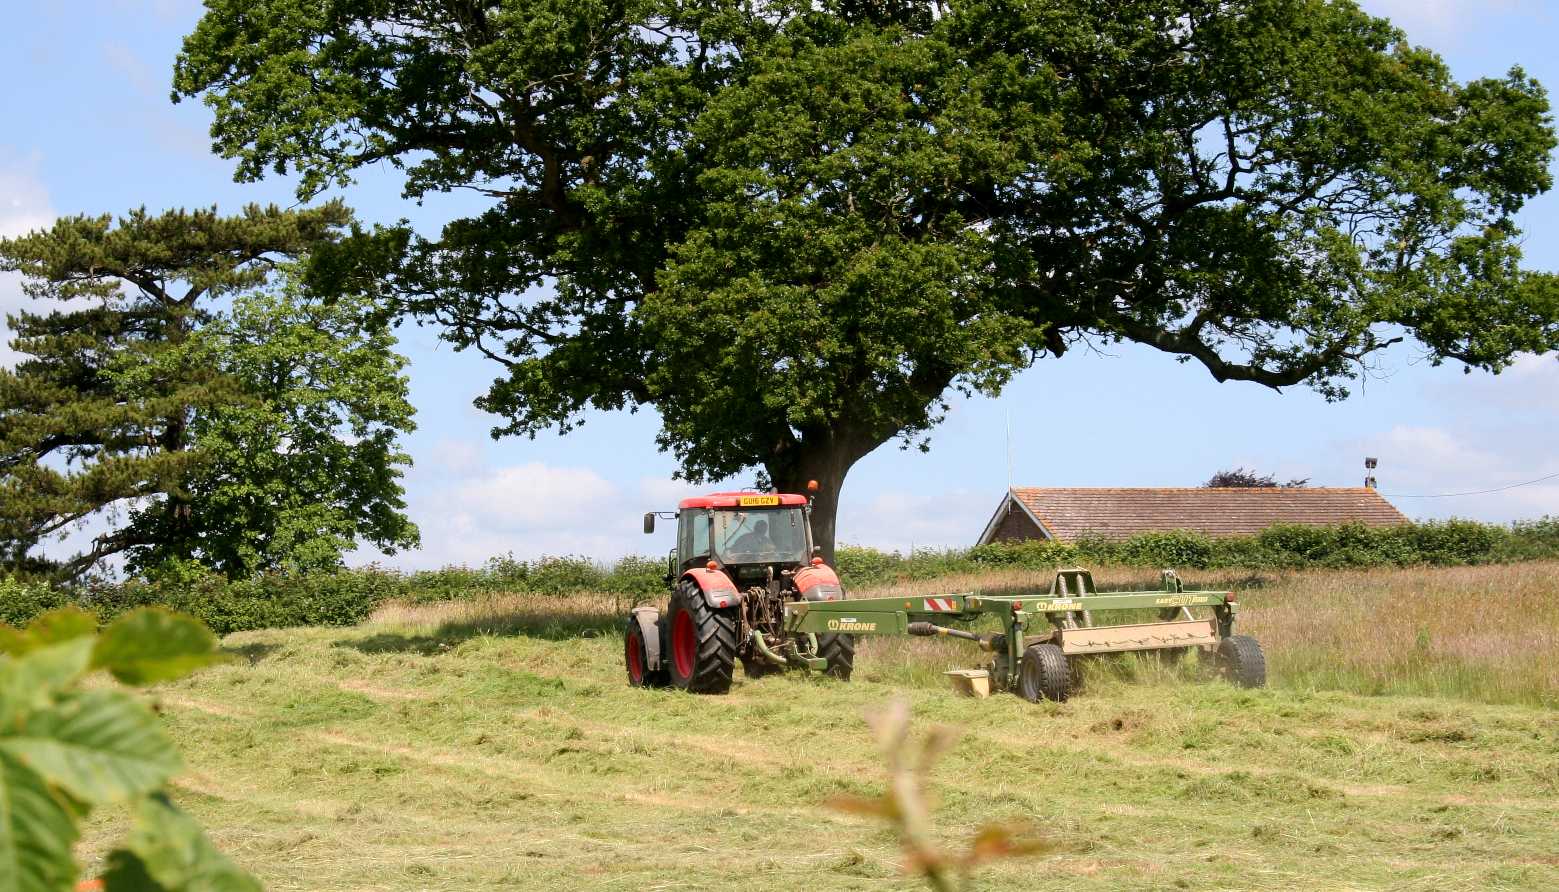 A tractor mowing the field adjacent to Herstmonceux museum in Sussex